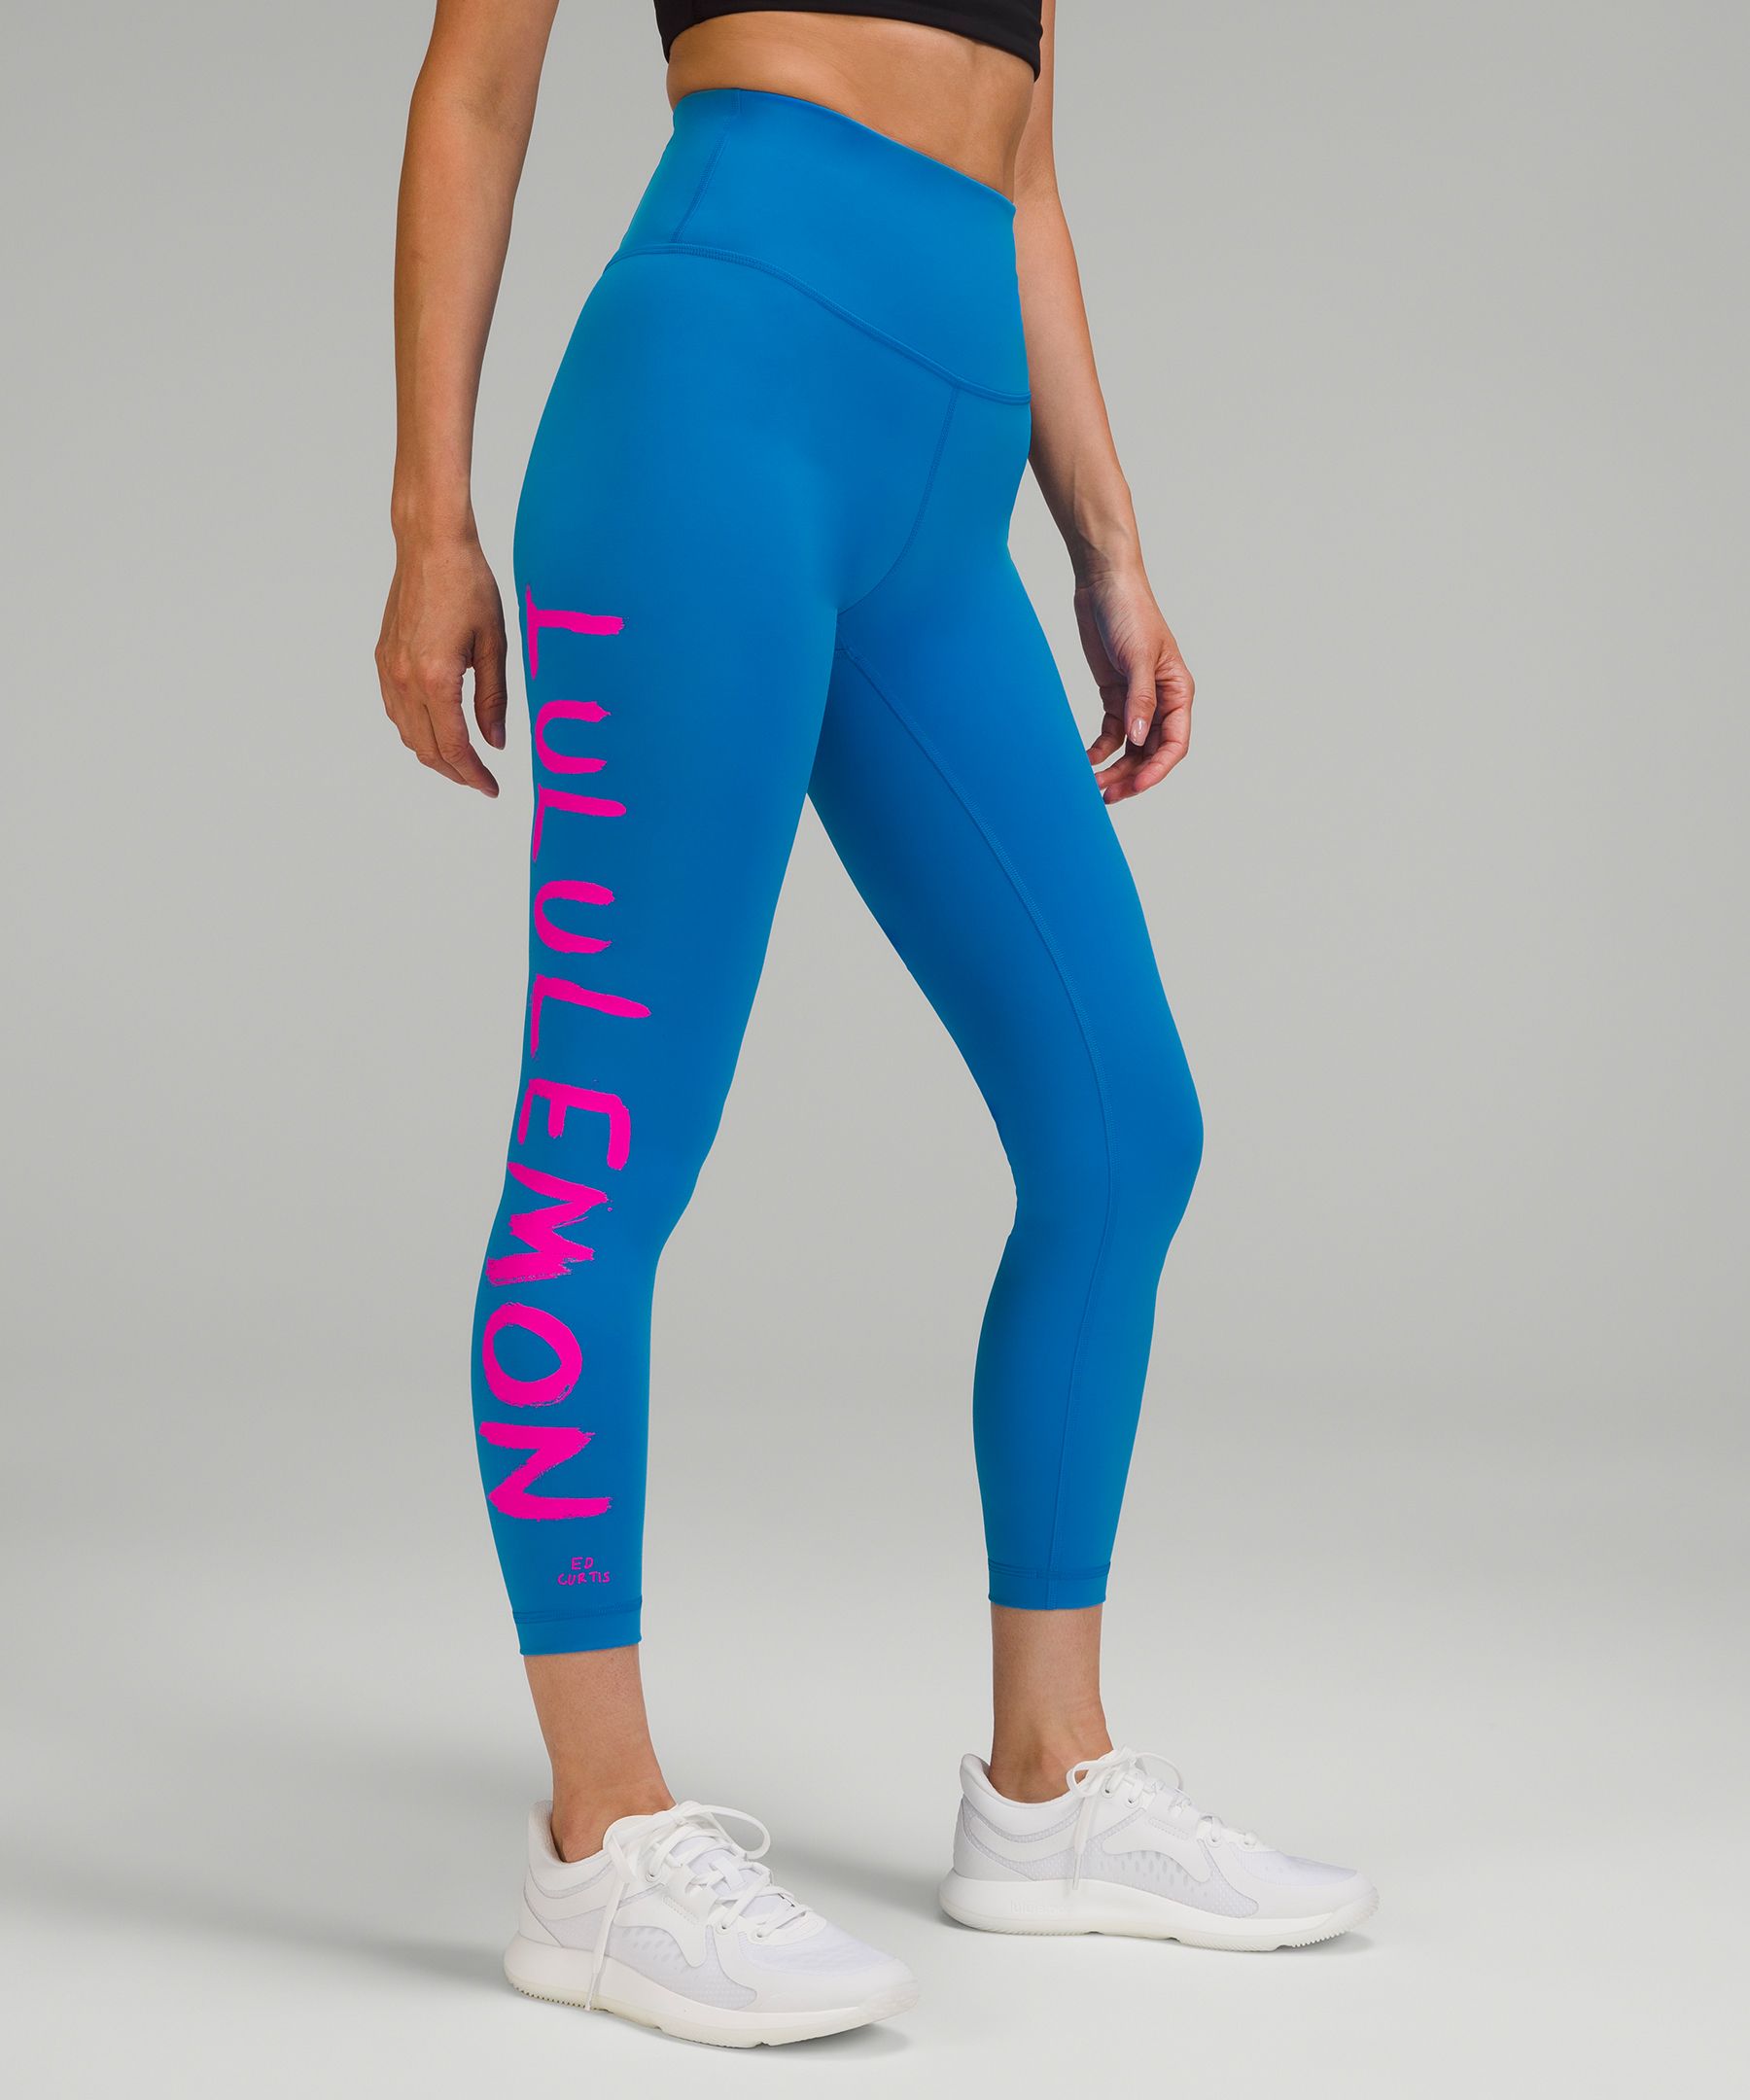 Women's Other Lululemon Wunder Train High Rise Tight Reviews